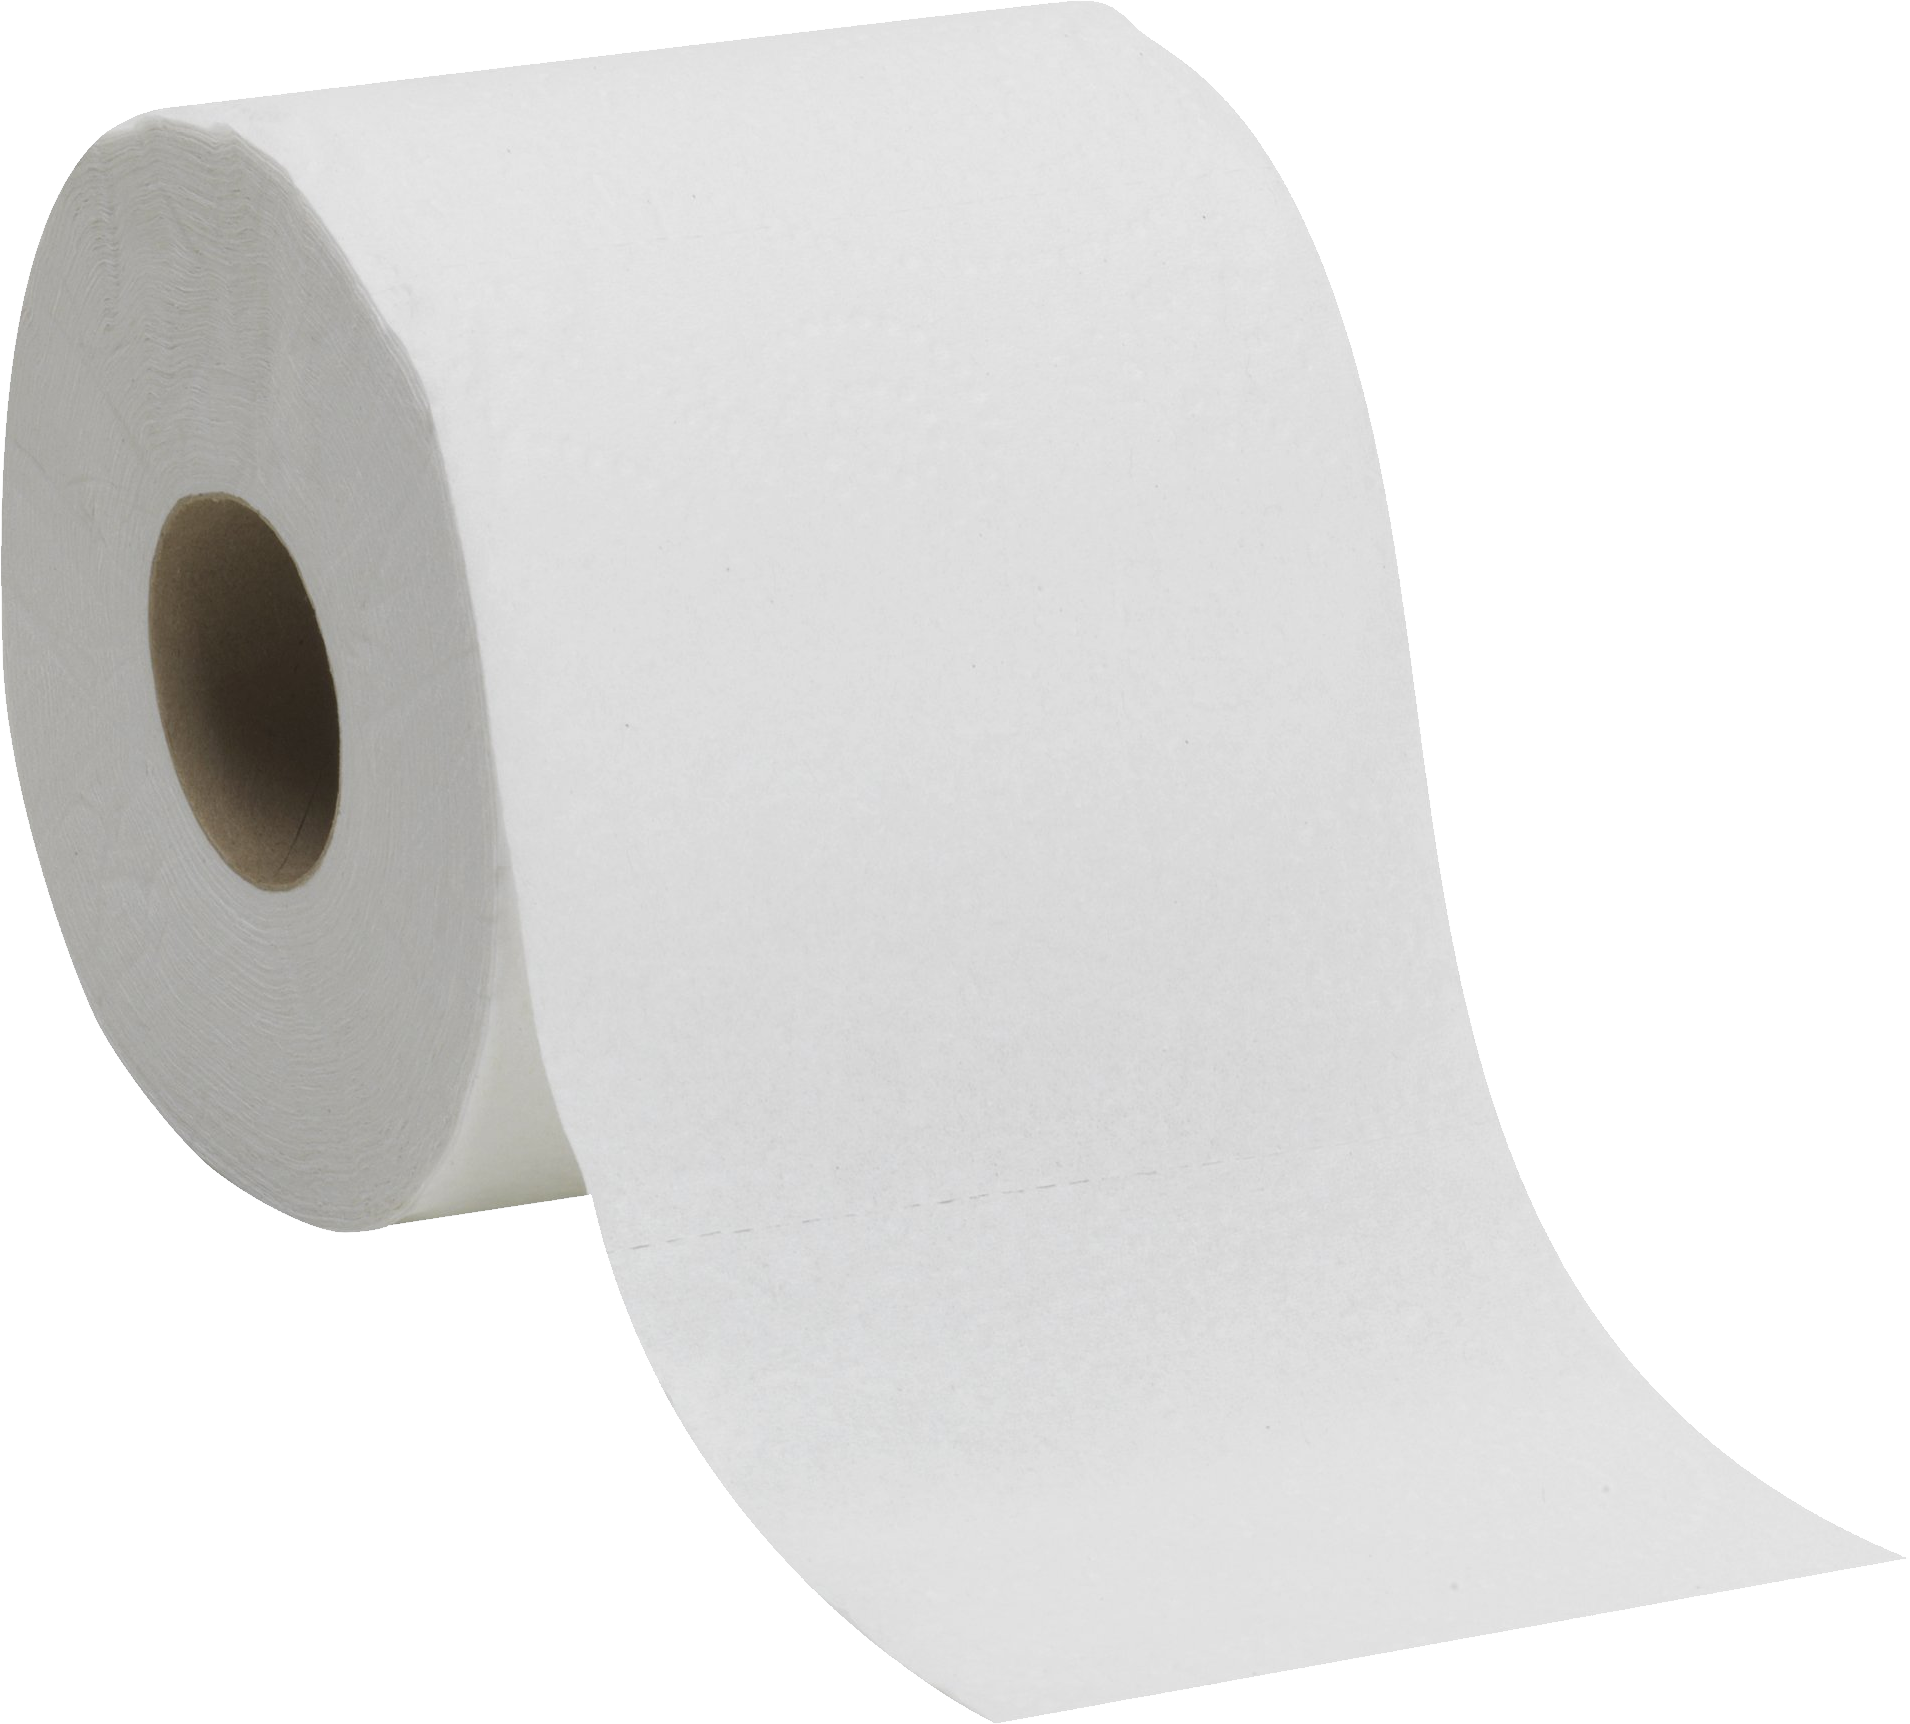 Bathroom Toilet Paper PNG Clipart Background